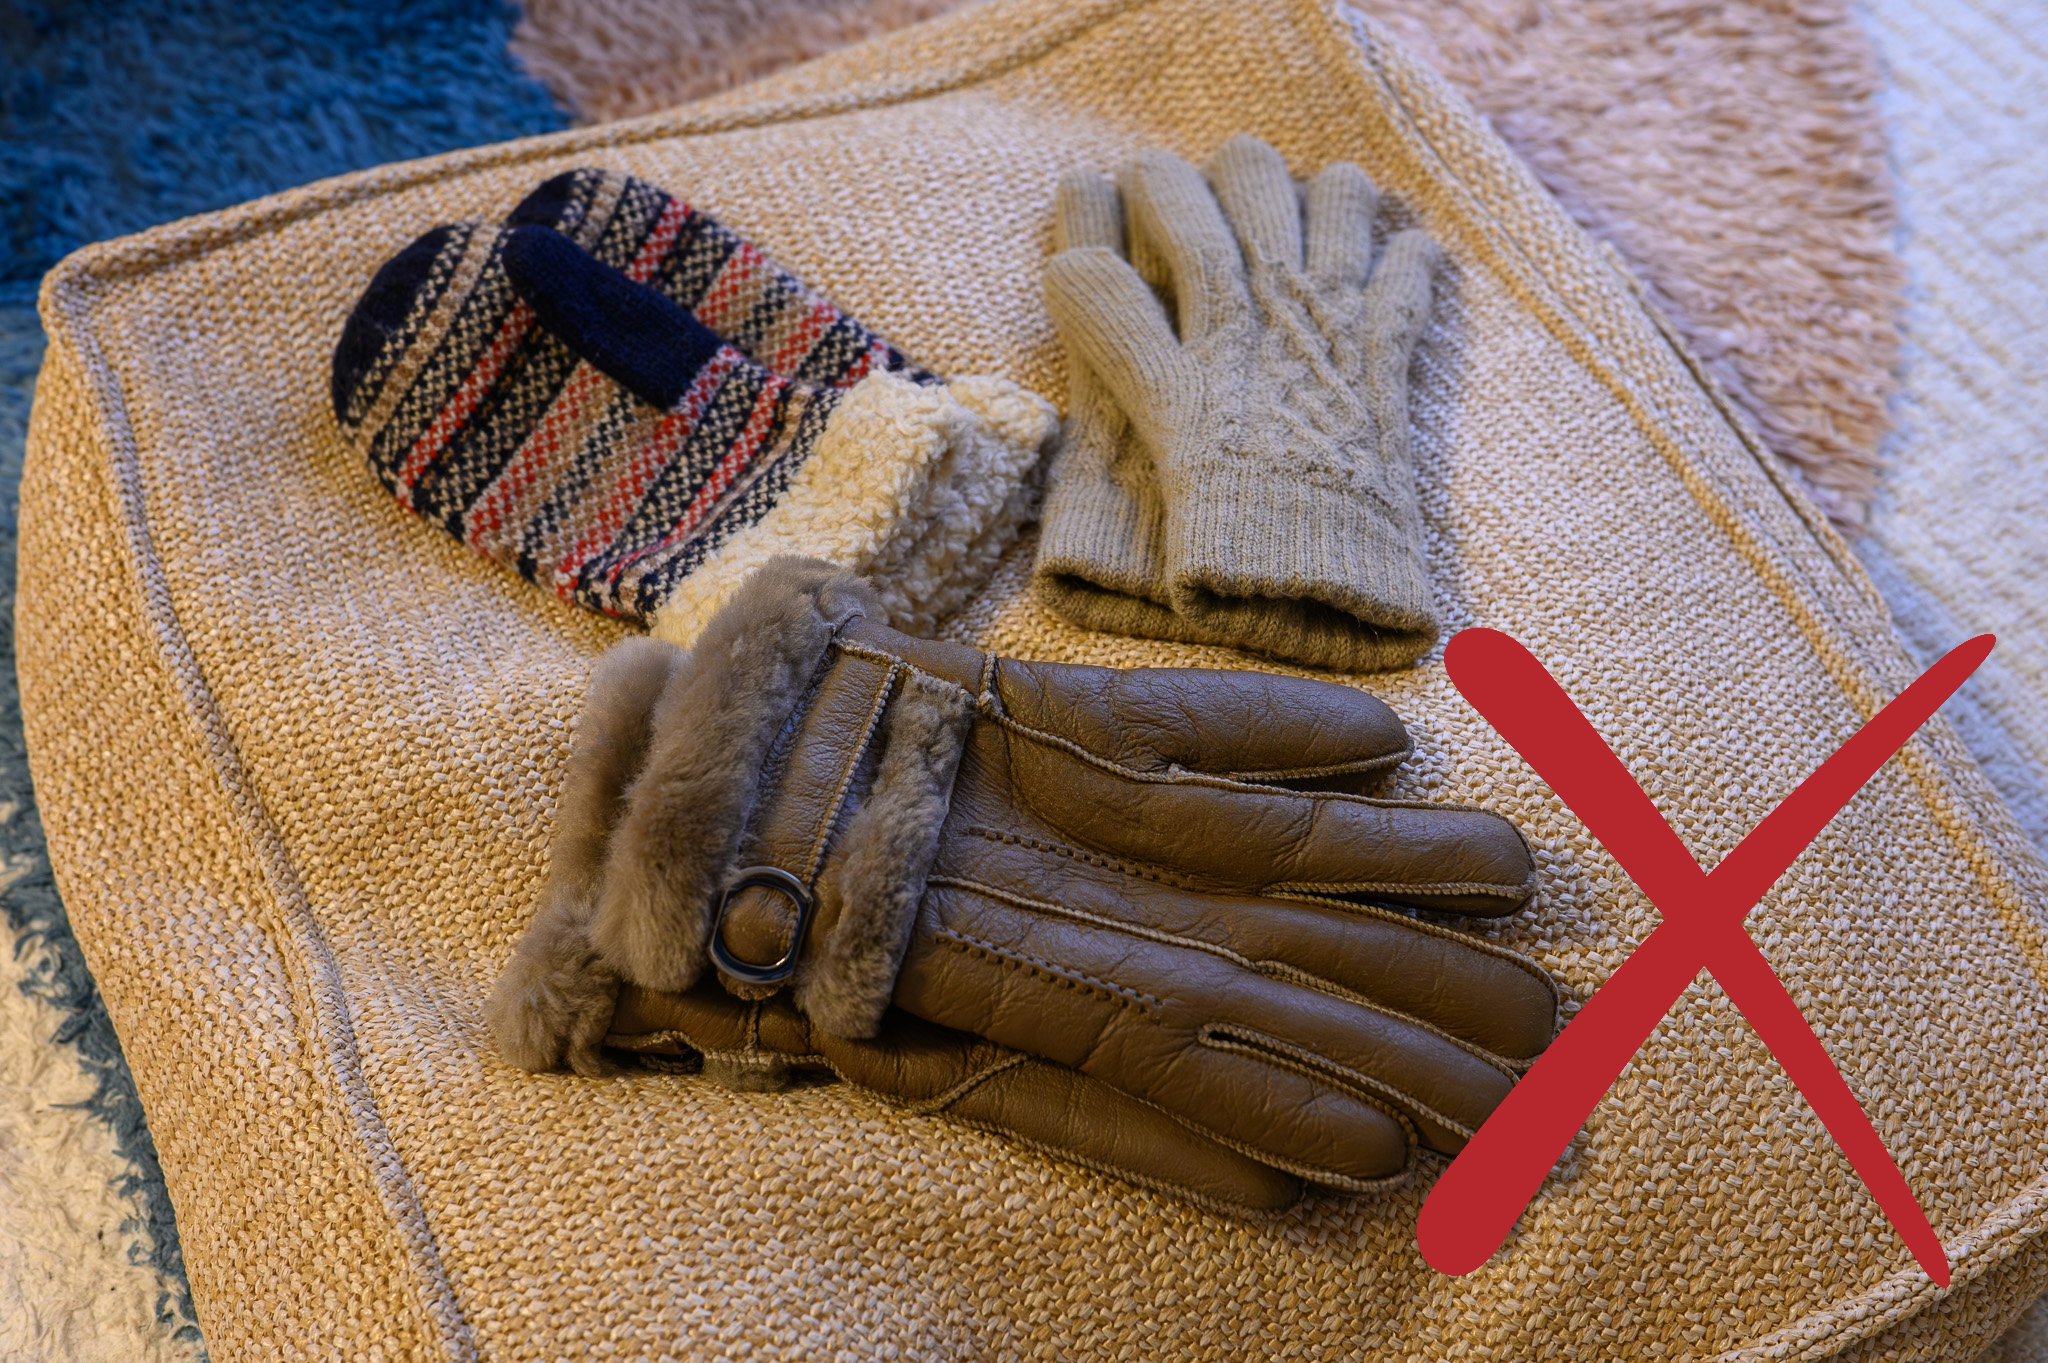 Three pairs of gloves on a cushion. One is a pair of knitted mittens, the other a pair of knitted gloves. The last pair are tan sheepskin gloves.